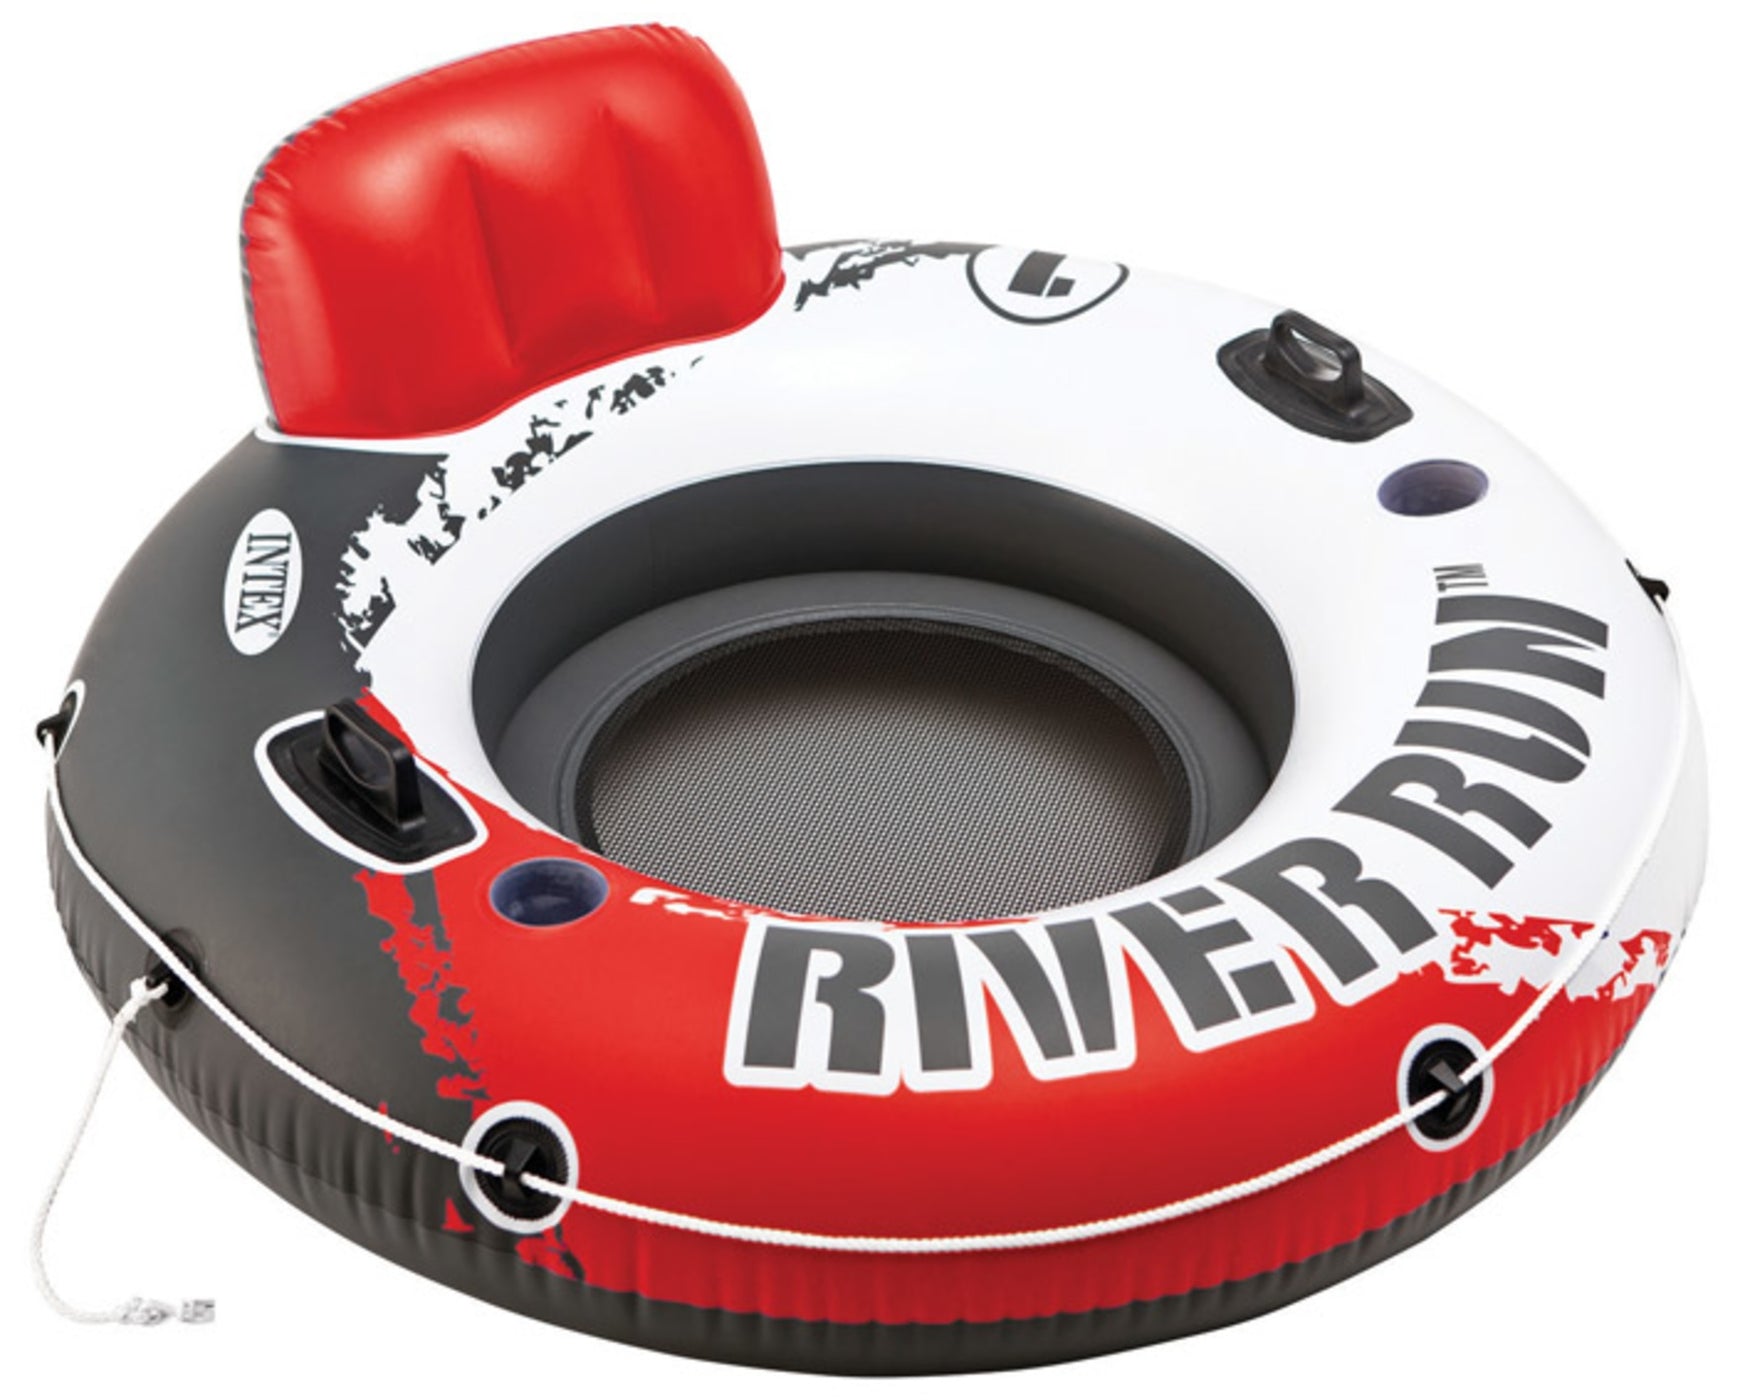 Intex 56825ep River Run Inflatable Floating Tube Red —